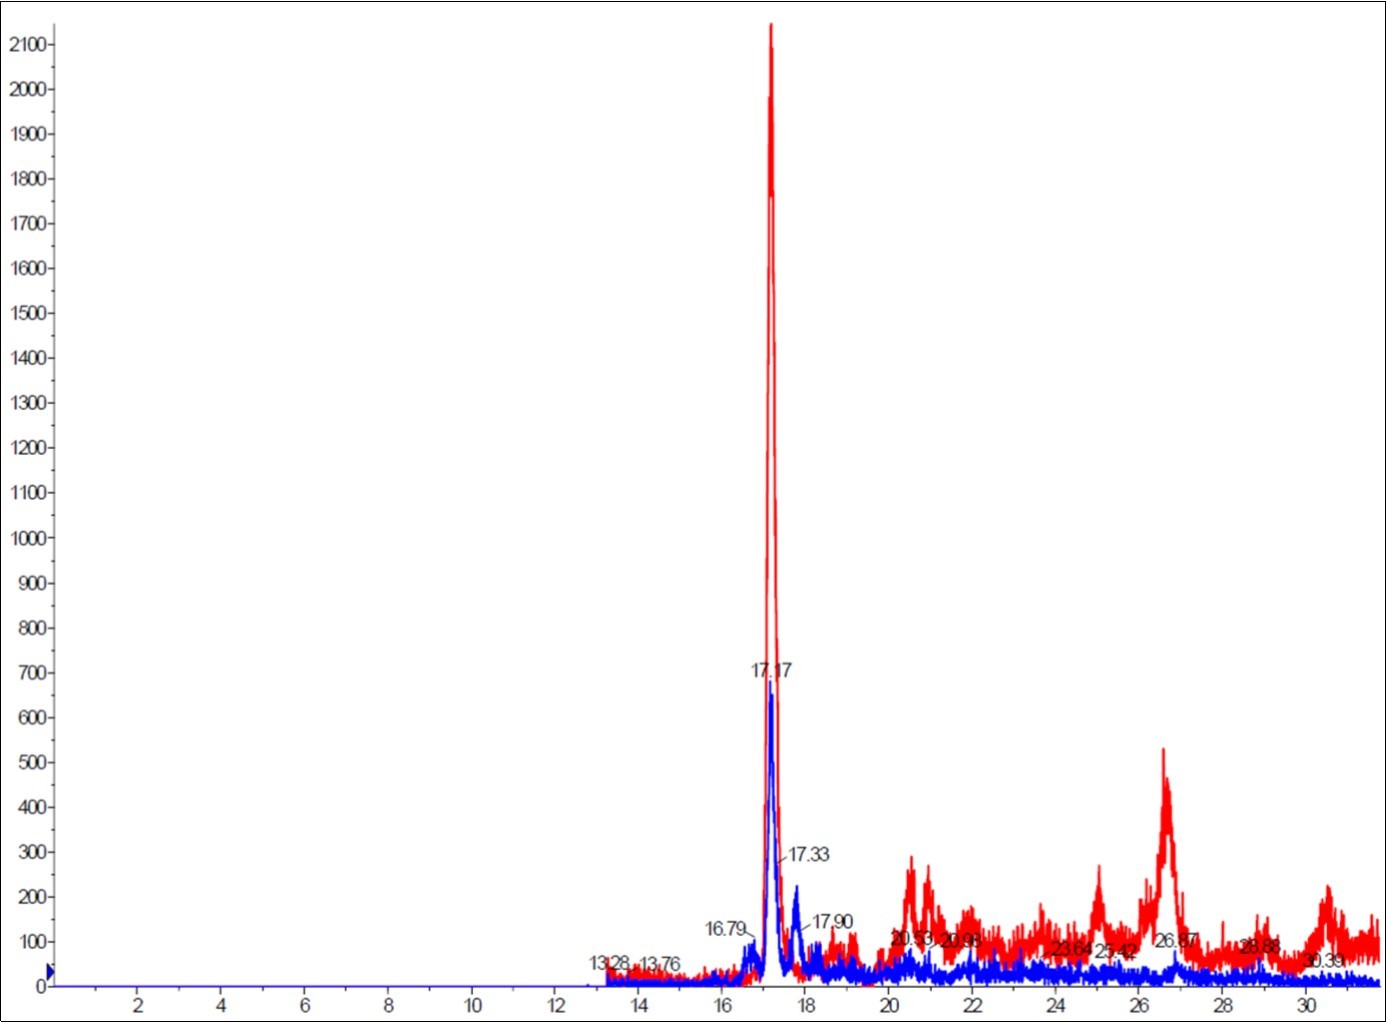  A representative chromatogram of the detection of urinary 8-oxodG obtained from stable isotope                dilution HPLC-MS/MS analysis of urine from human subjects. The HPLC trace of internal standard is indicated in red, and the HPLC trace of 8-oxodG in the analyzed sample is indicated in blue.